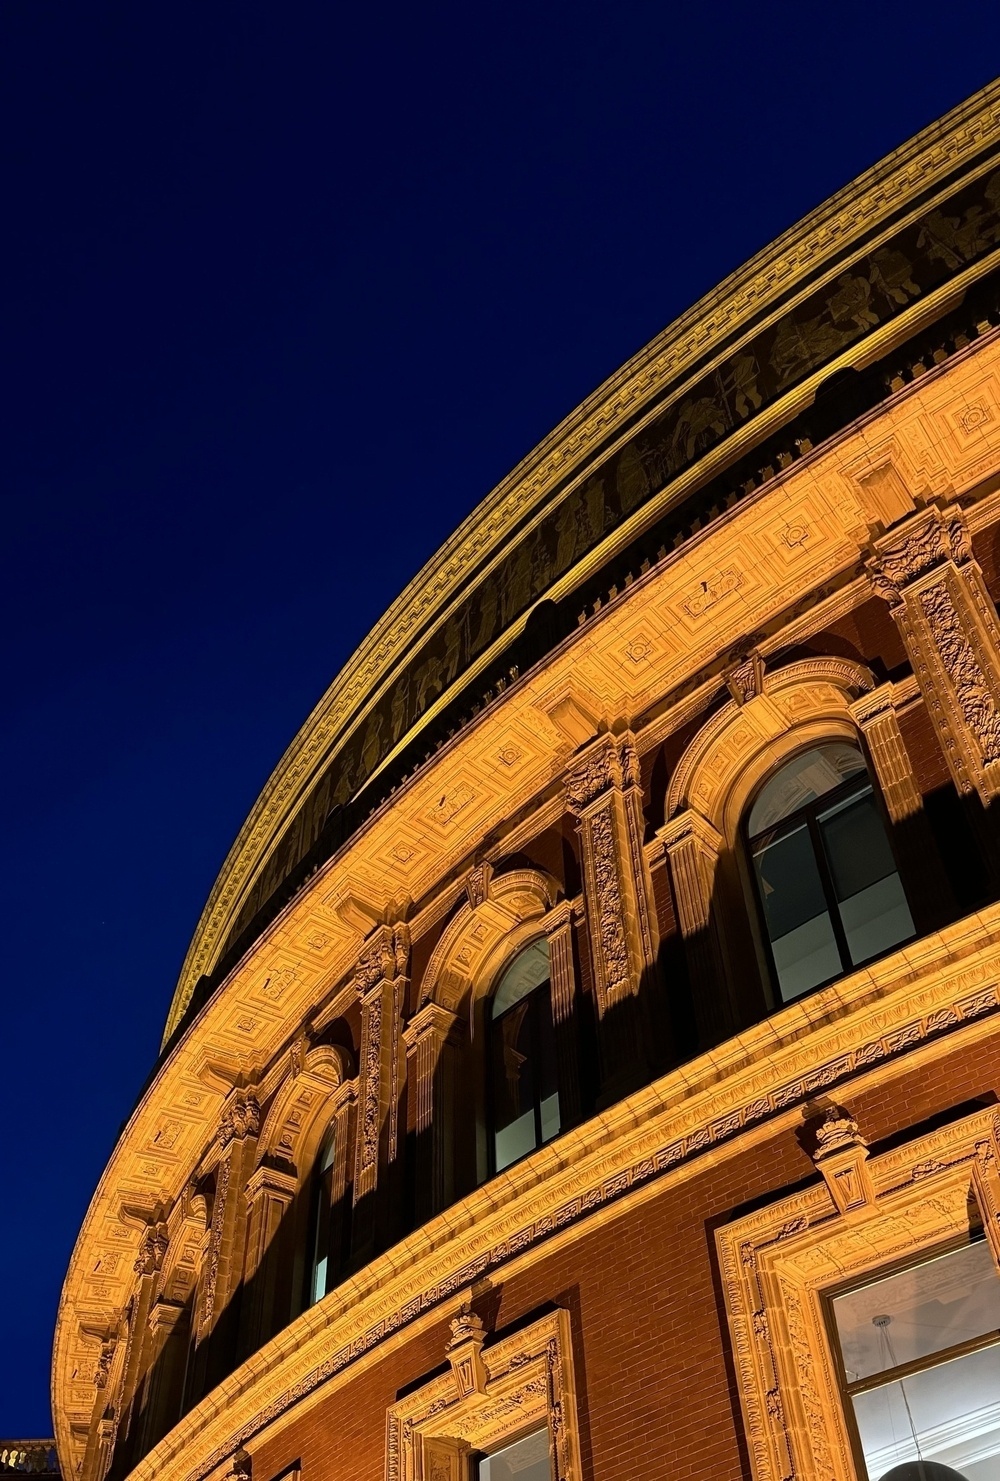 The lit facade of the Royal Albert Hall curving against a deep blue night sky.